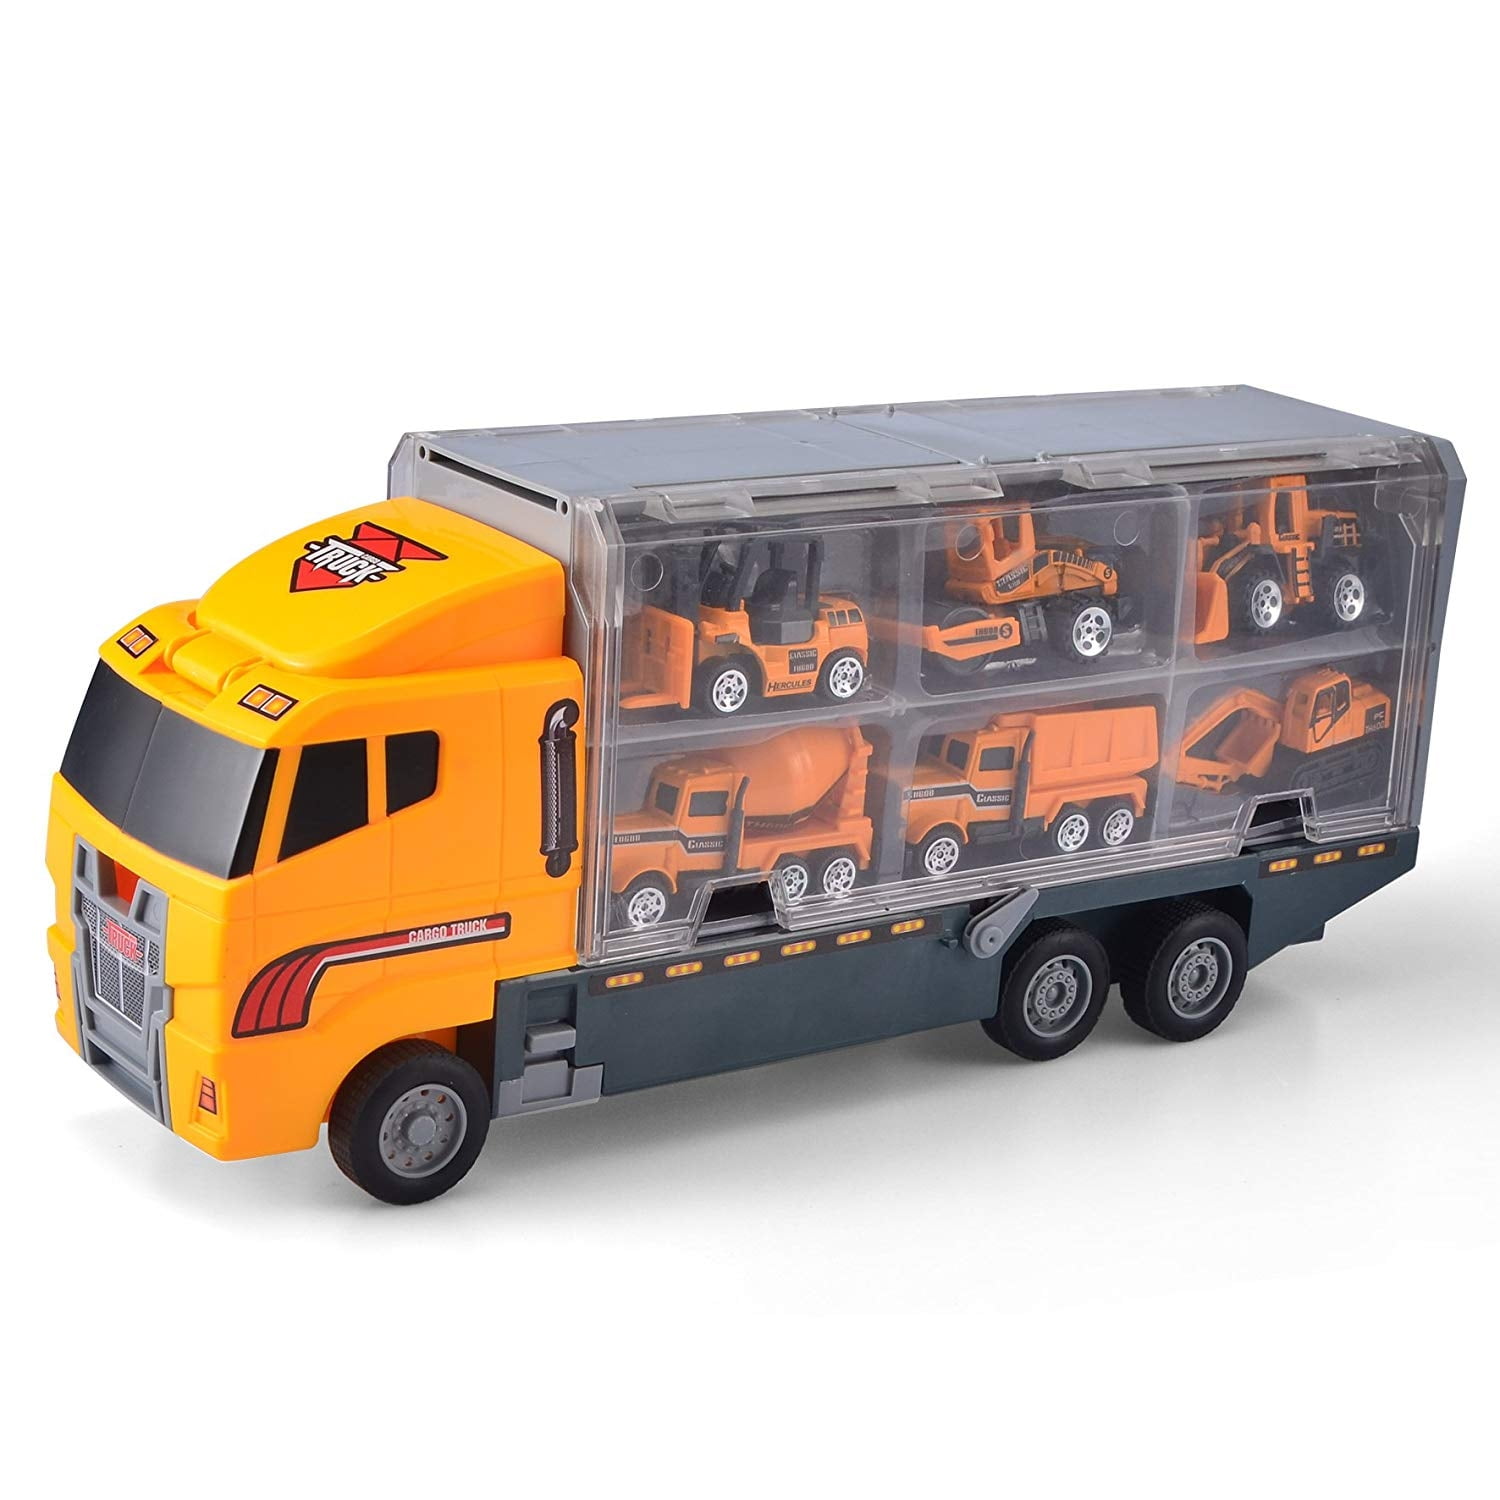 Details about   Truck Carrier Kids Die Cast Plastic Toy & 6 Mini Cars Play Set Transporter Lorry 